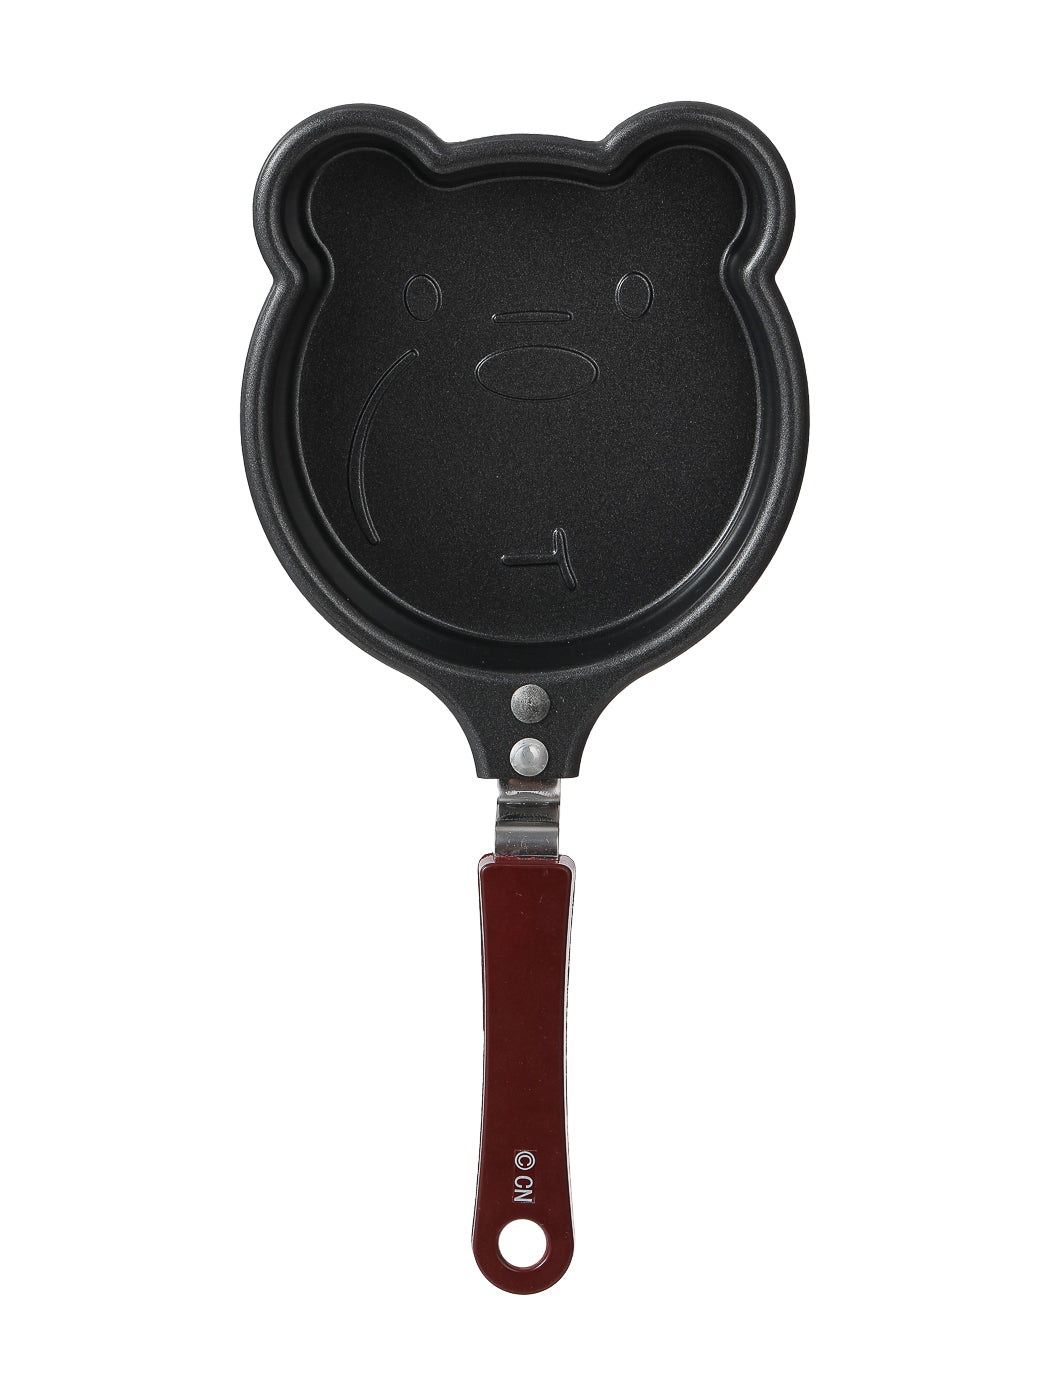 MINISO WE BARE BEARS COLLECTION 4.0 FRYING PAN 13CM(ICE-BEAR) 2010665112107 COOKWARE